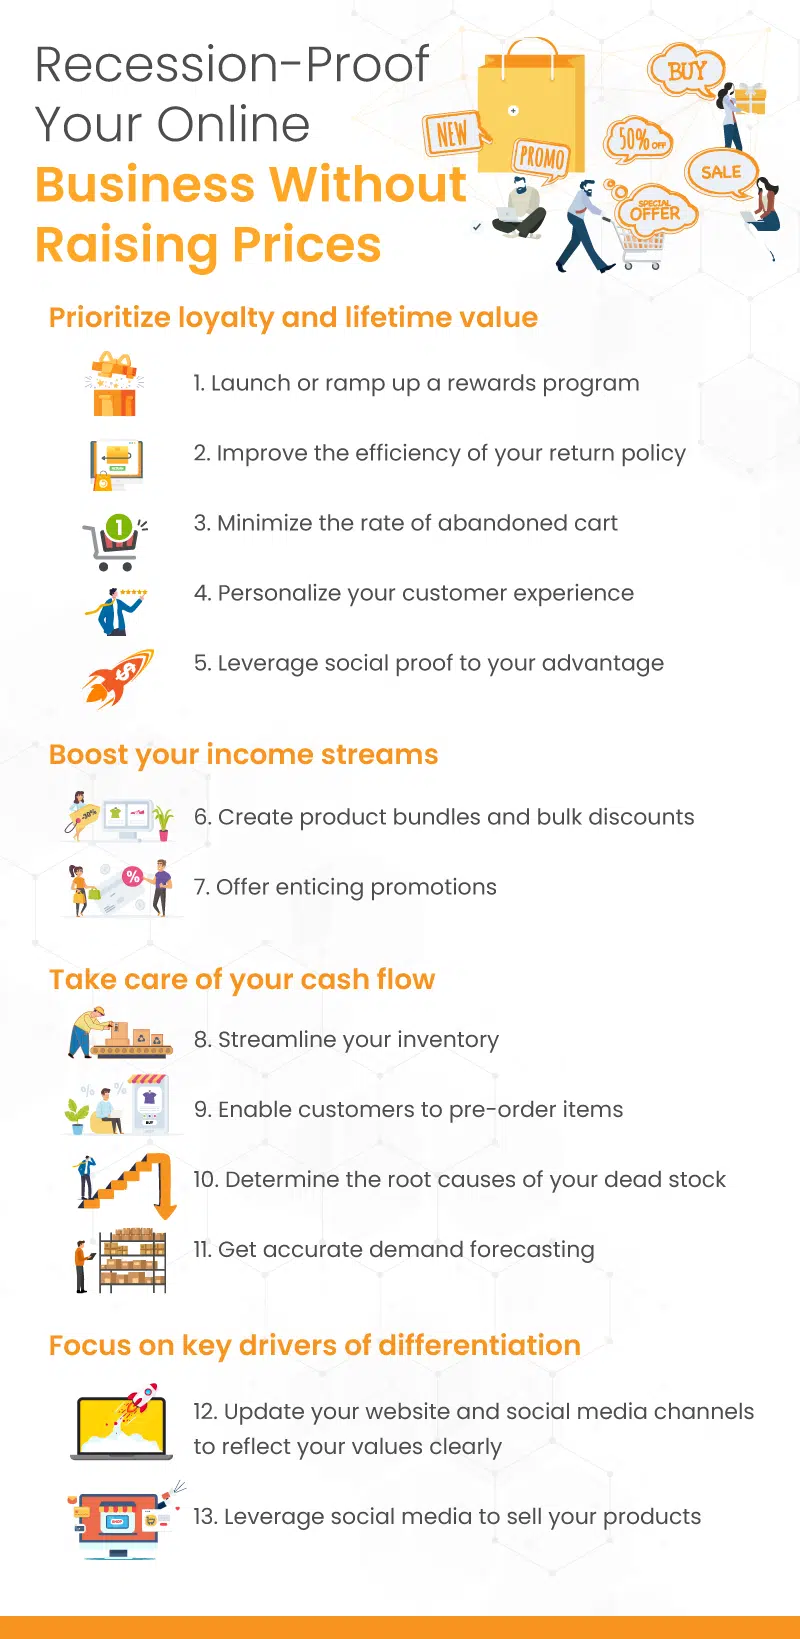 an infographic on how to recession-proof your online business without raising prices